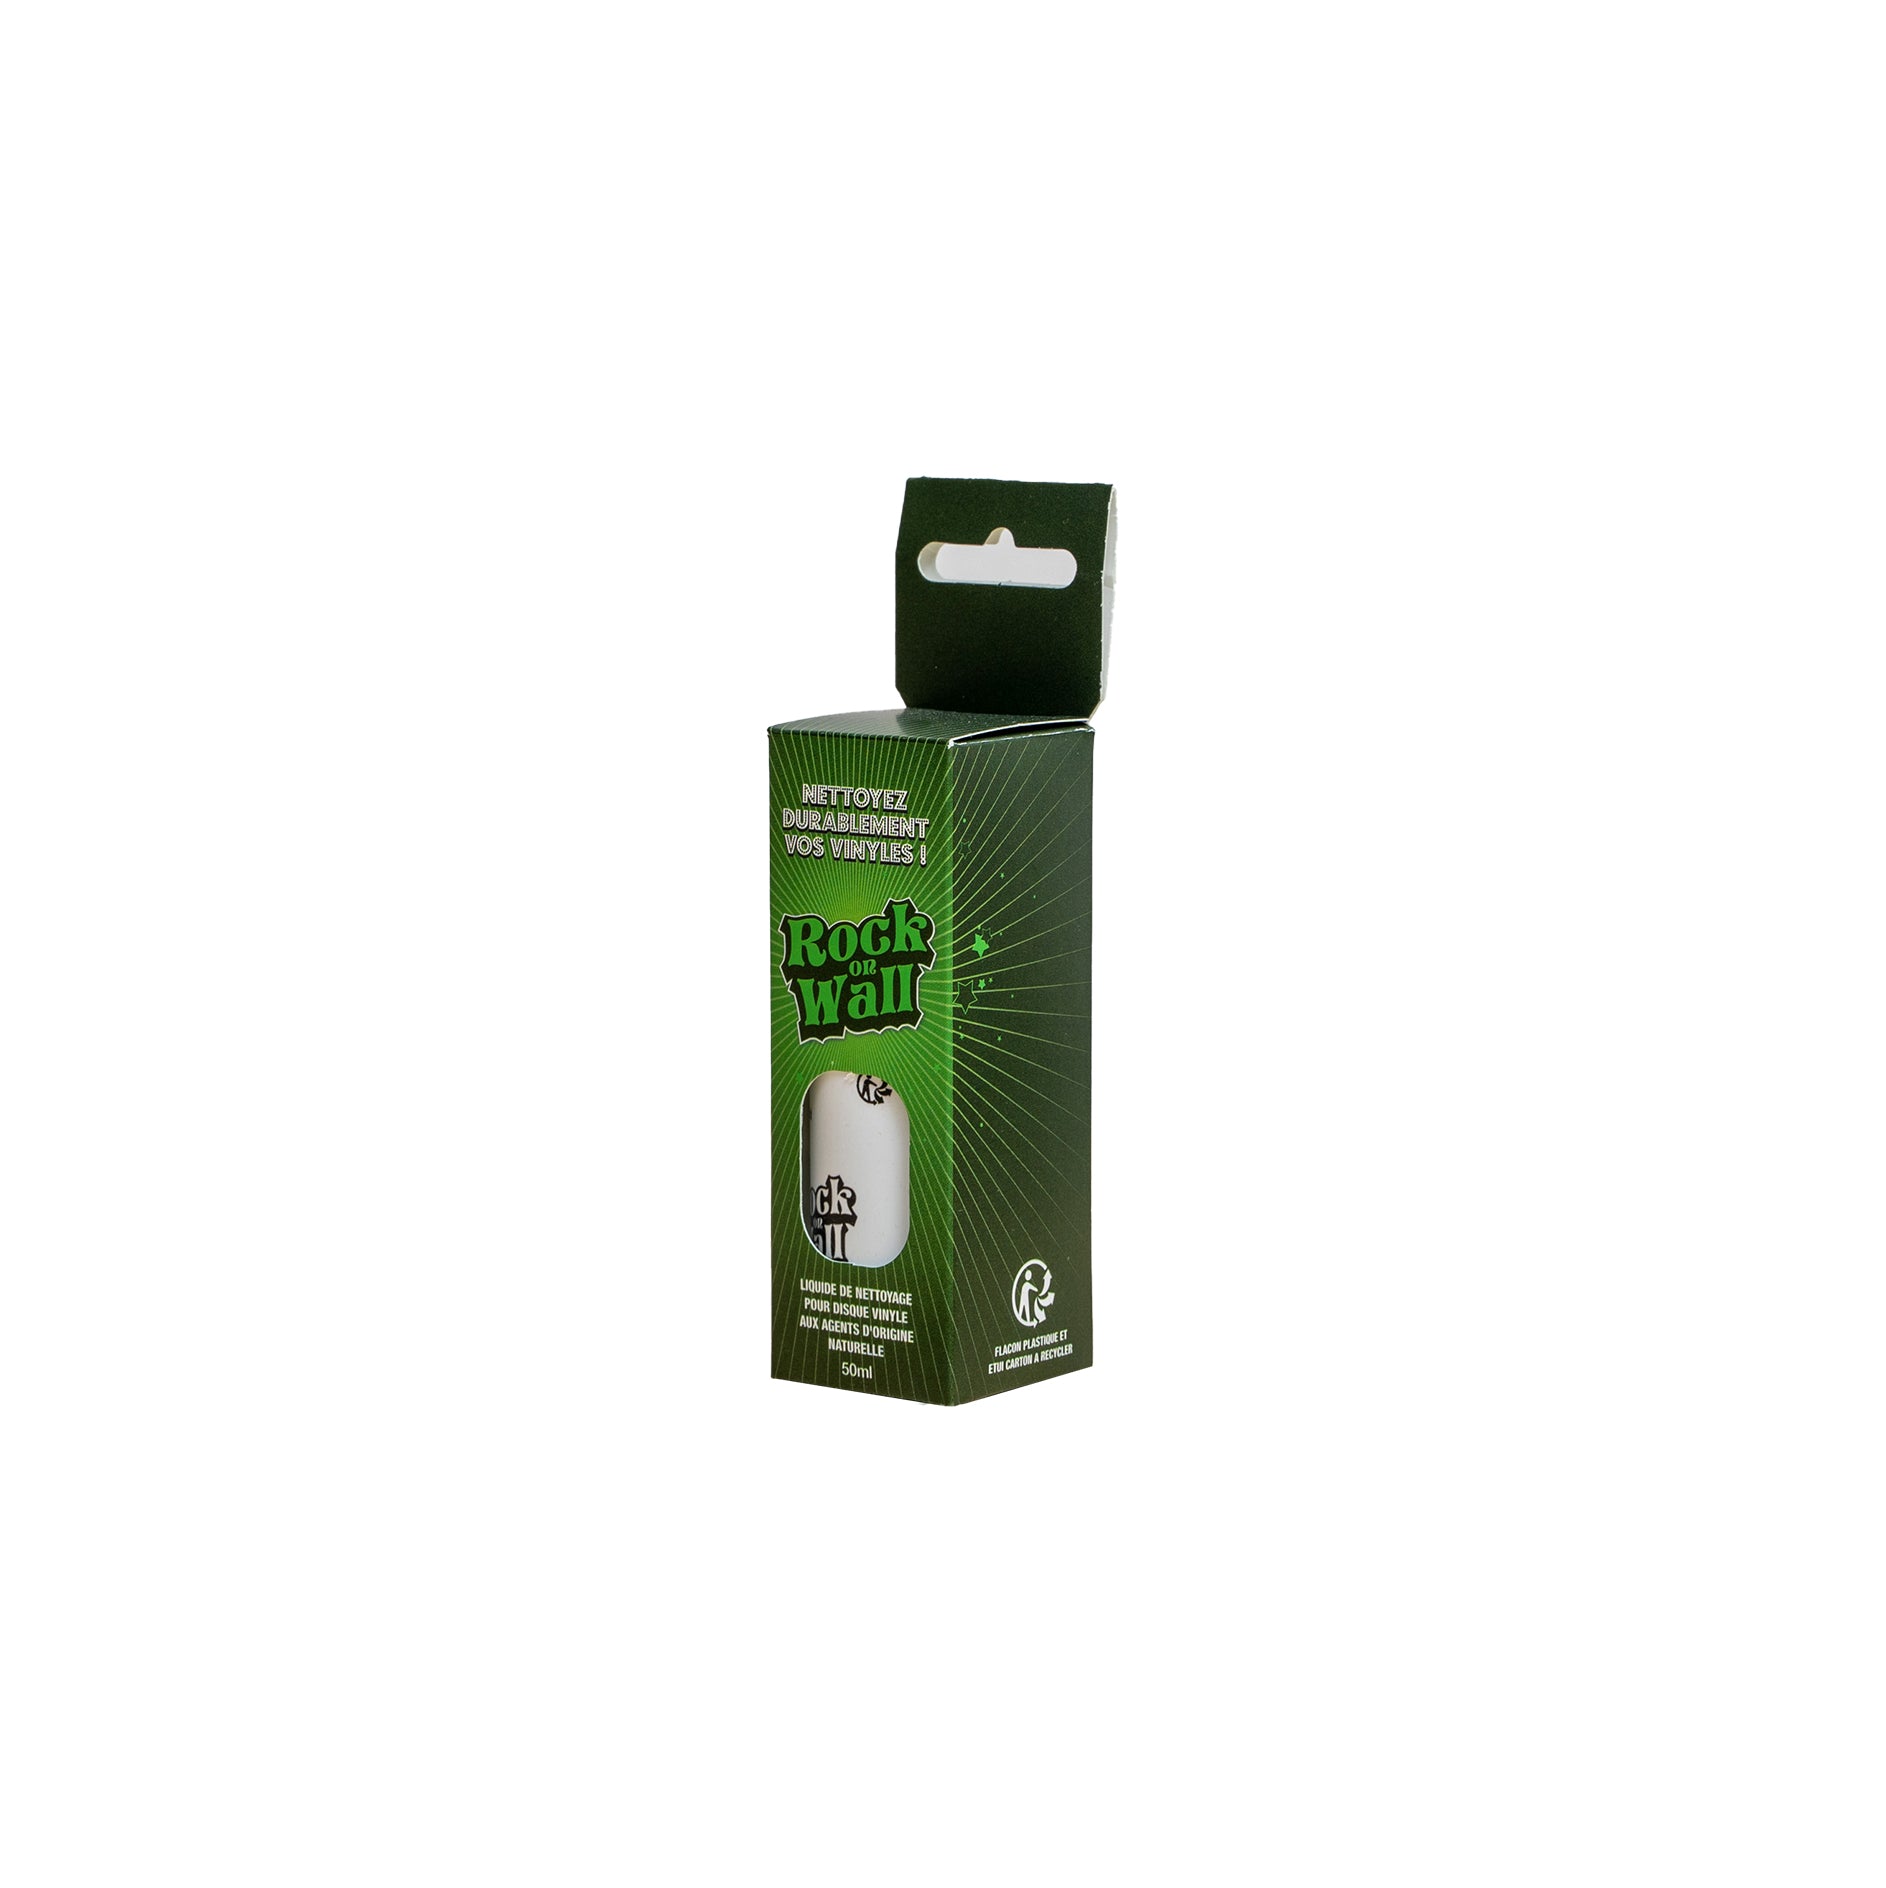 ◉  Natural LP records cleaner 50ml